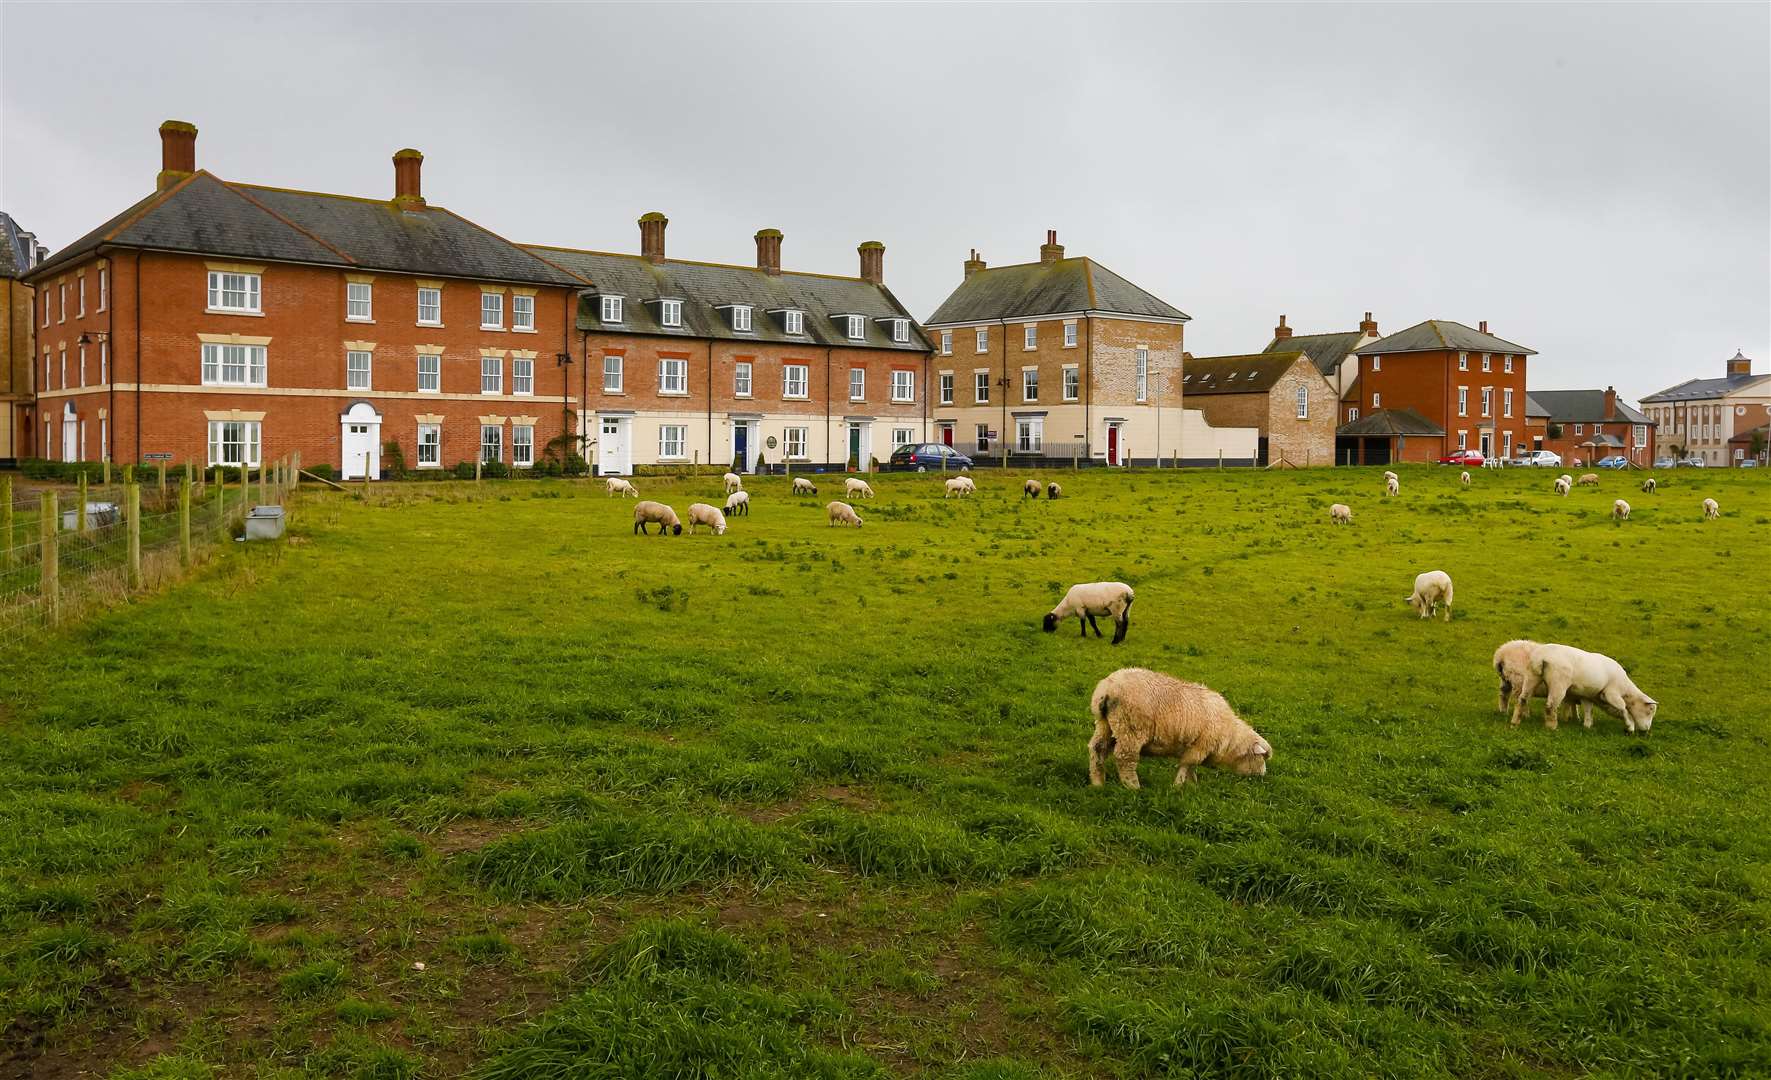 Poundbury in Dorset, which celebrates its 30th anniversary this year, has been named as one of the best places to live in the UK (Chris Ison/PA)